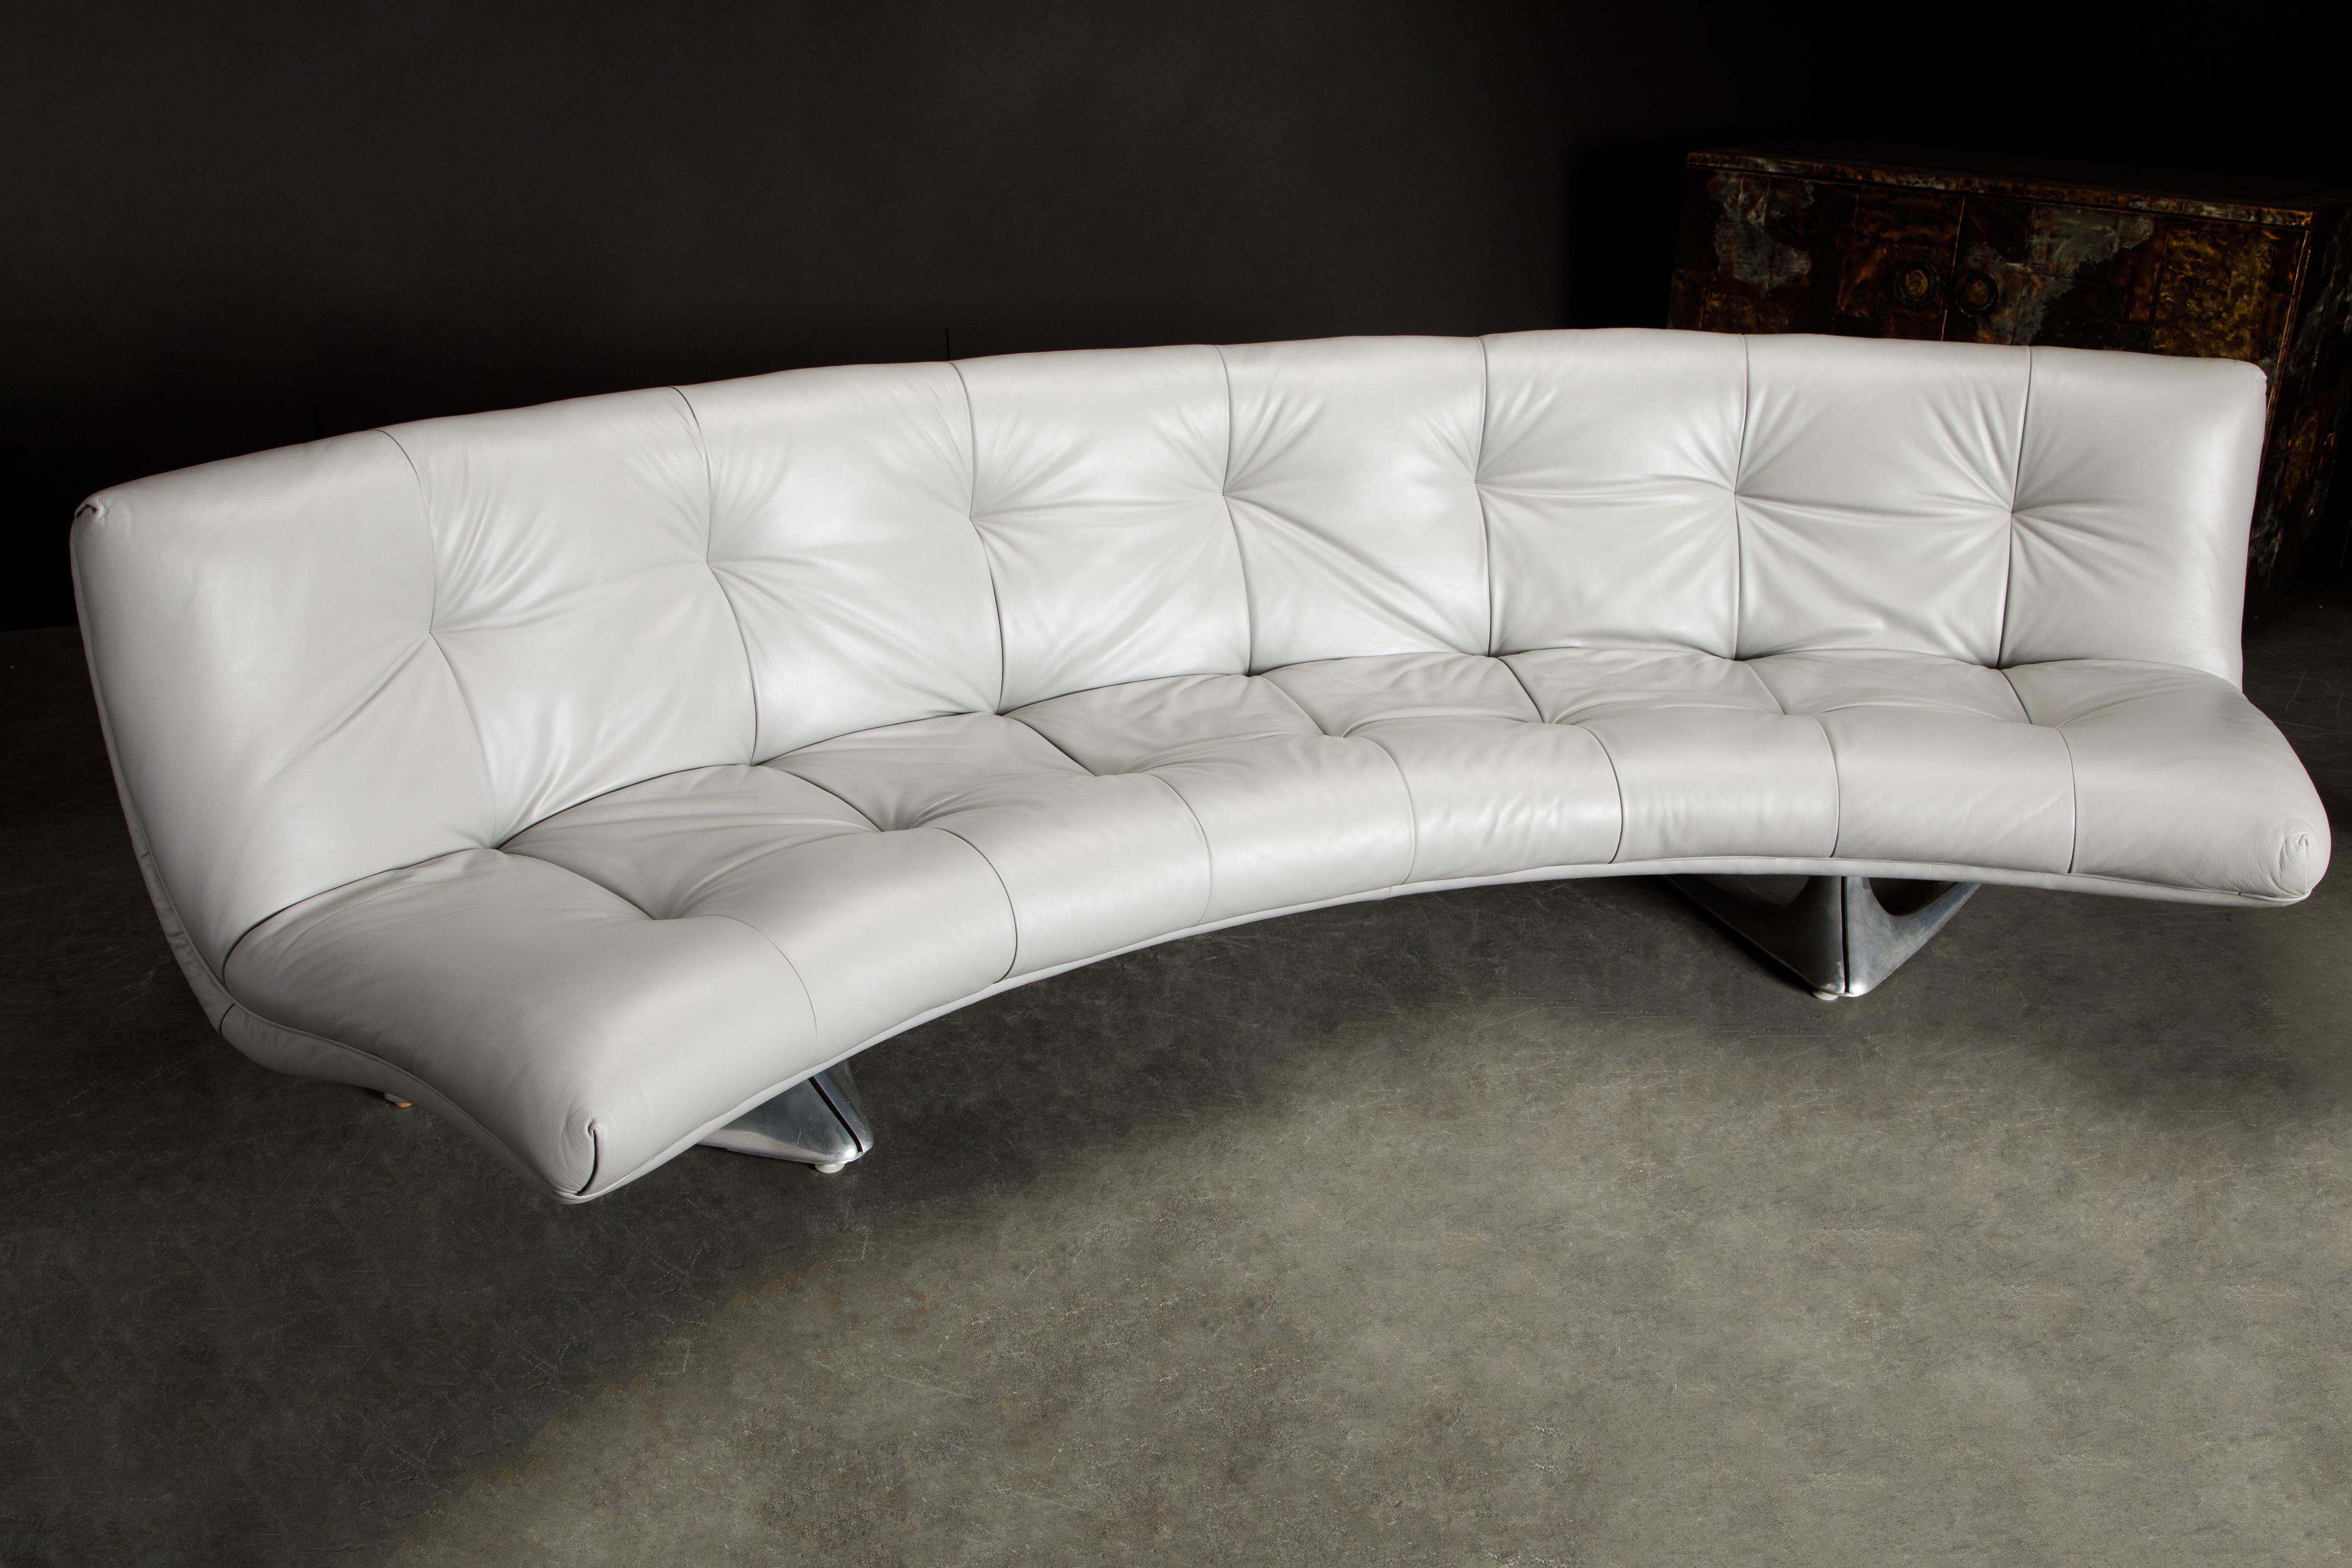 American Rare 'Unicorn' Leather and Aluminum Curved Sofa by Vladimir Kagan, c. 1963 For Sale